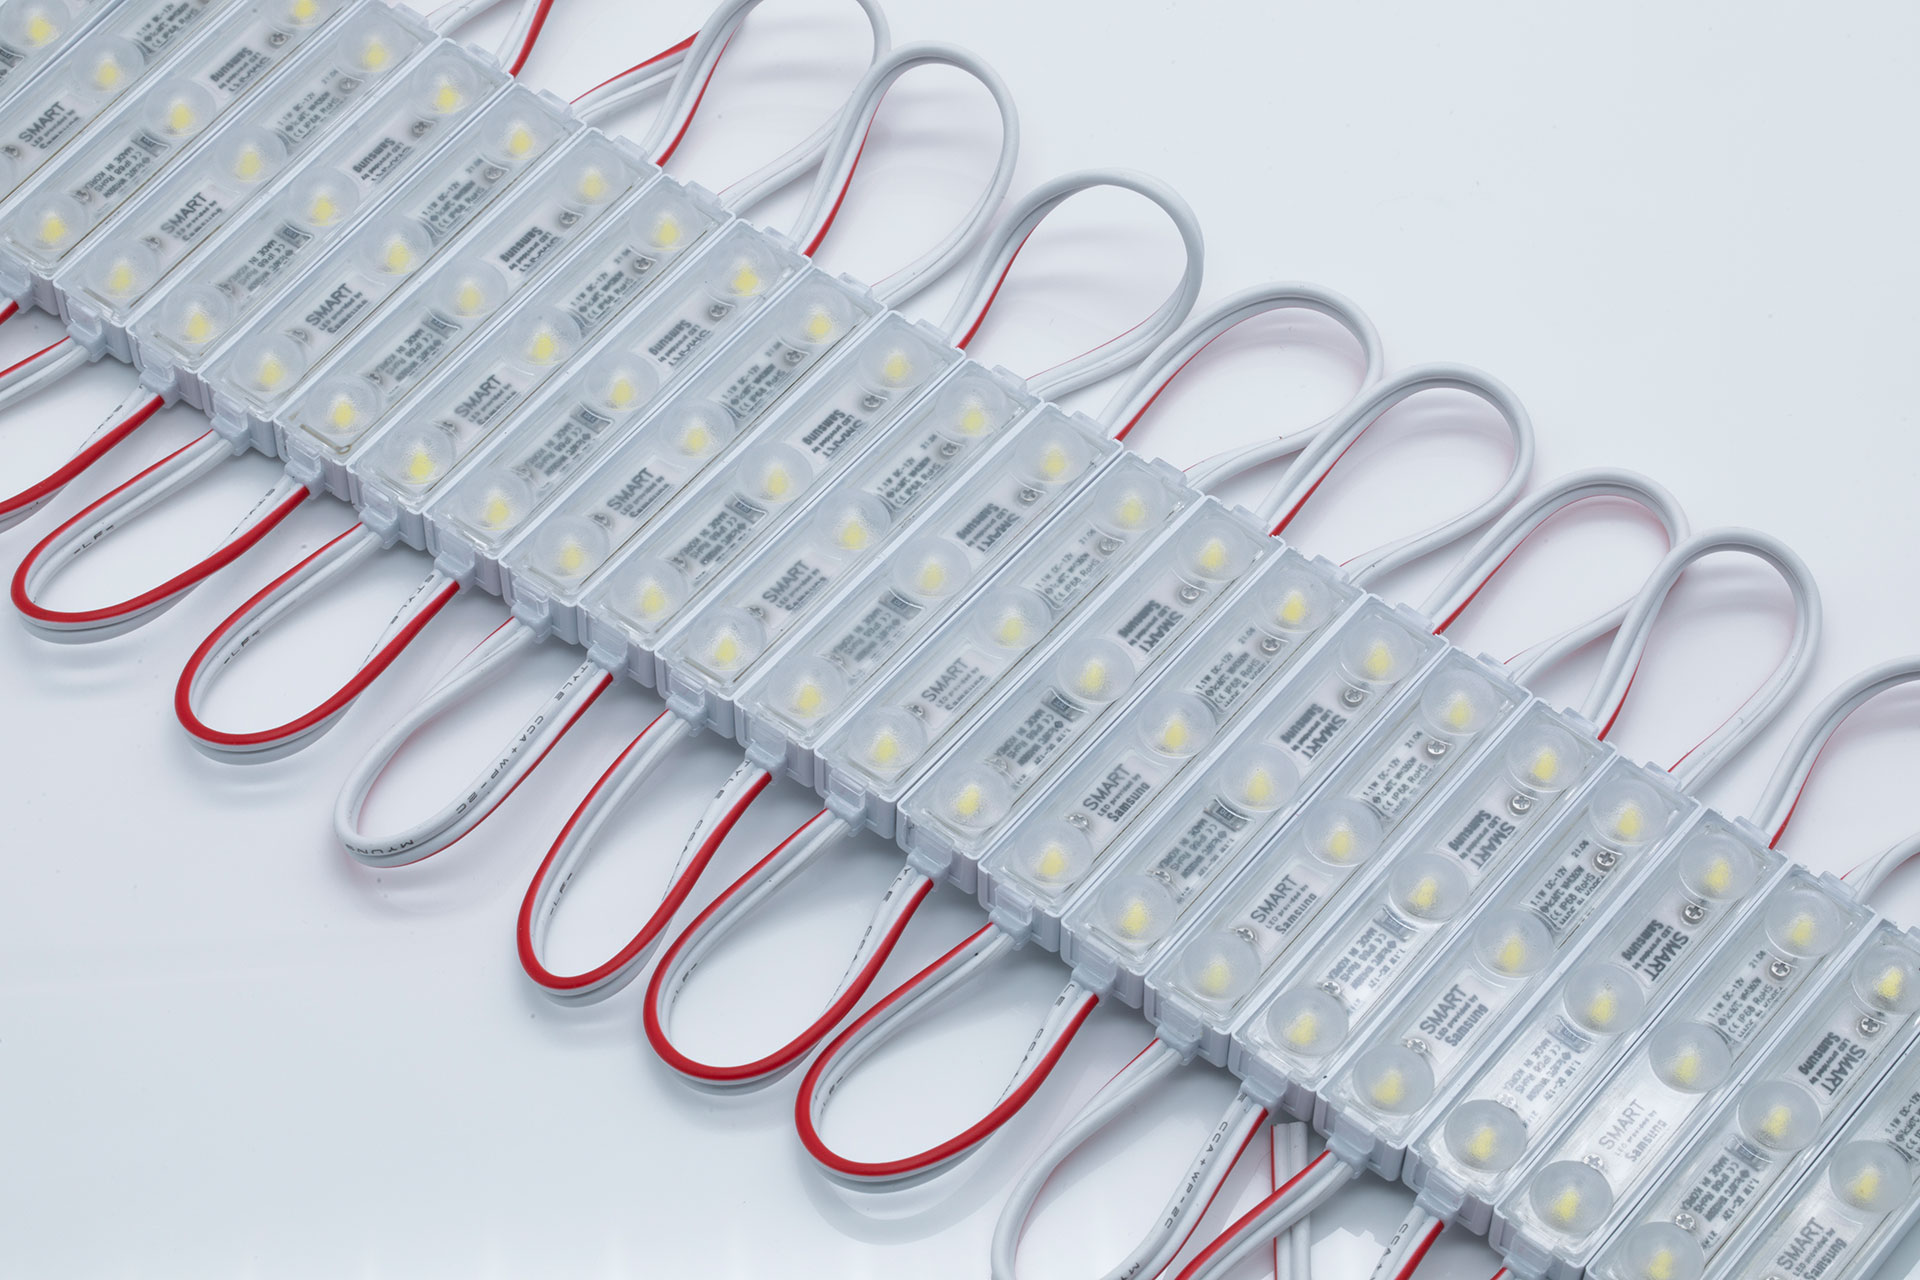 LED Module Leading supplier for LED Strips, Modules & Drivers in